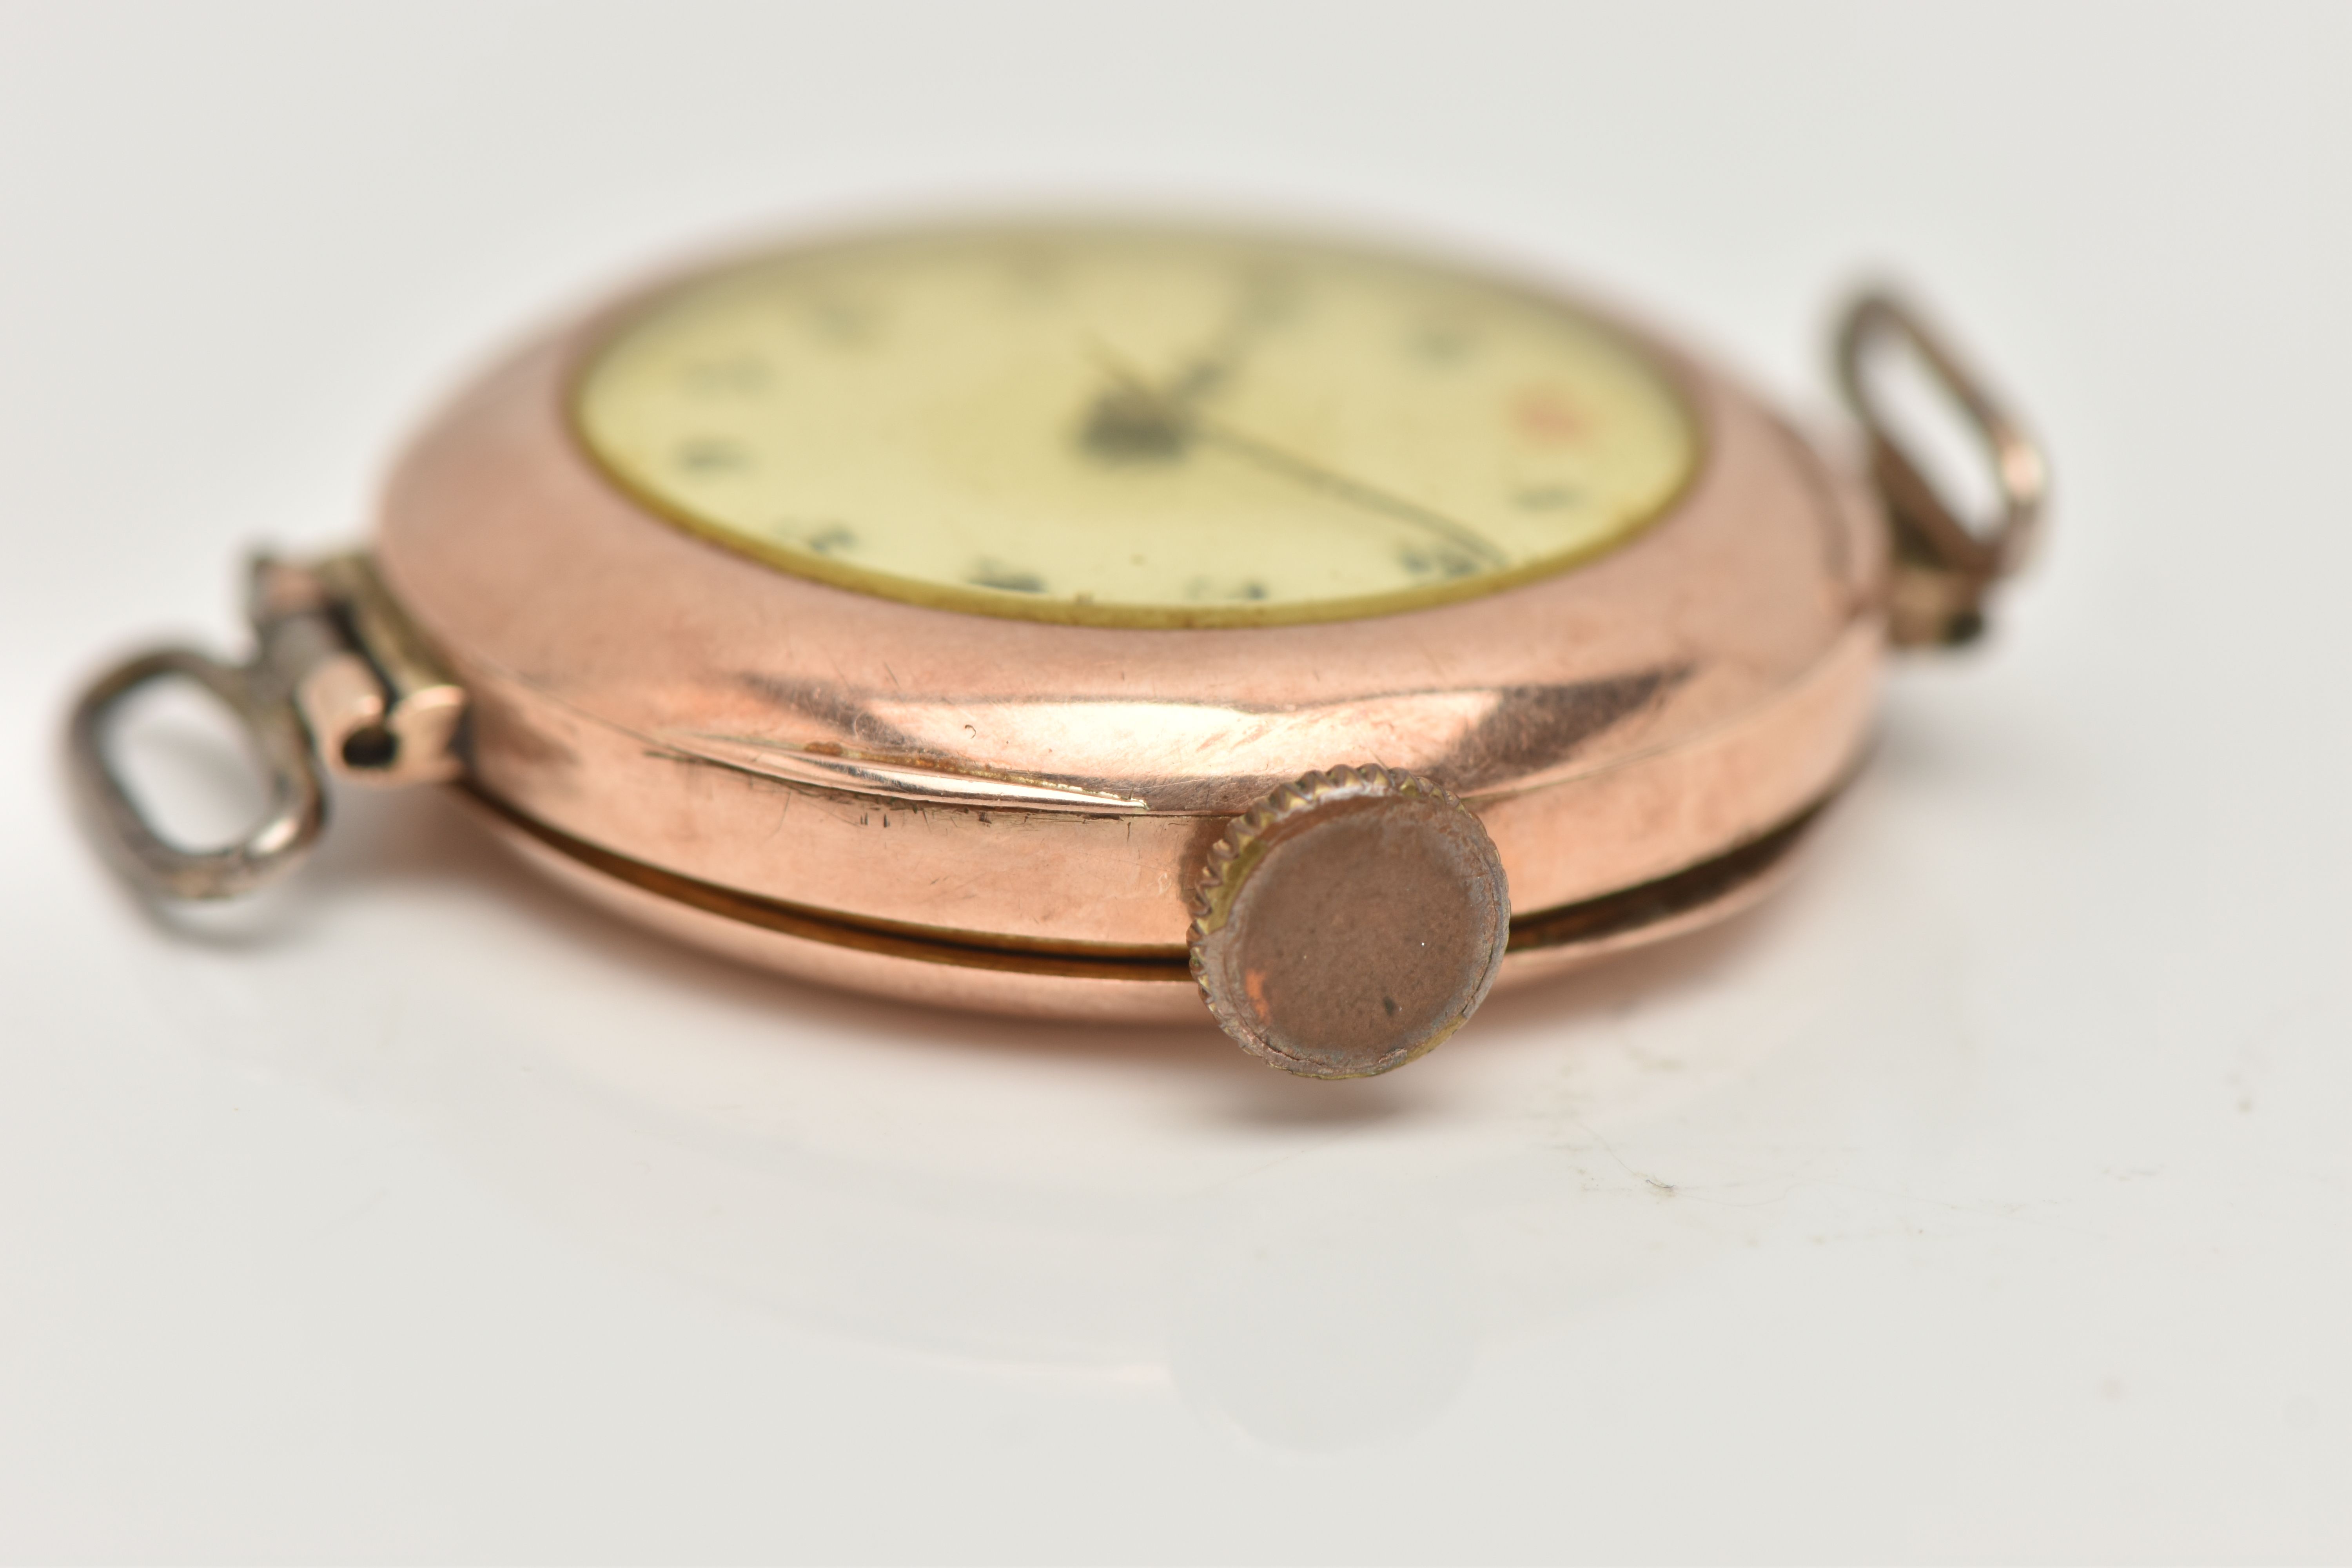 A 9CT GOLD 'ROLEX' WATCH HEAD, an early 20th century, manual wind watch head, round white dial, - Image 4 of 6